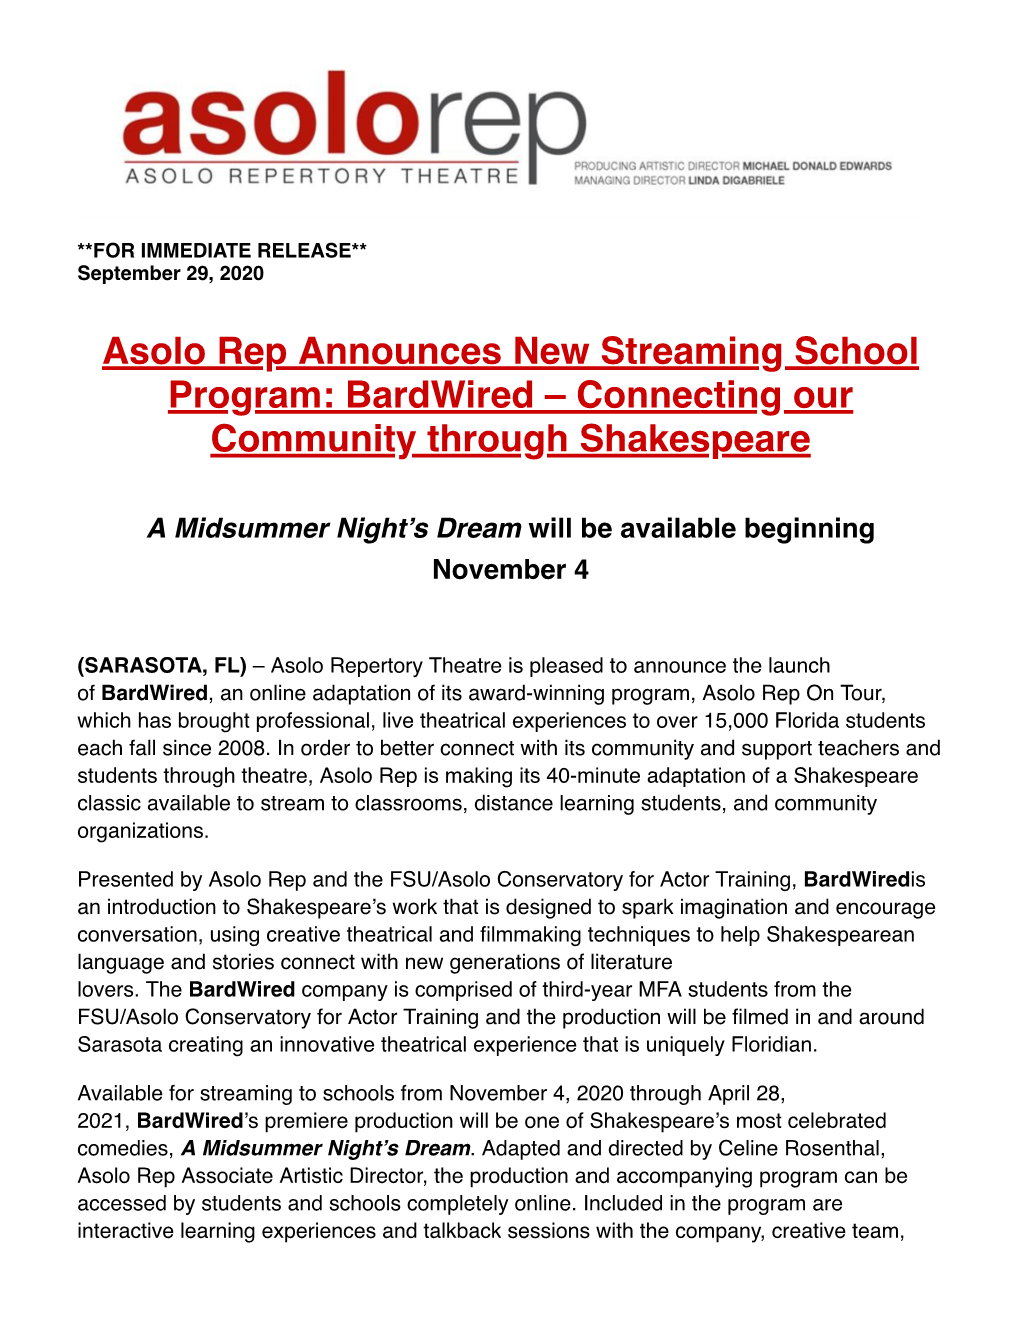 Asolo Rep Announces New Streaming School Program: Bardwired – Connecting Our Community Through Shakespeare